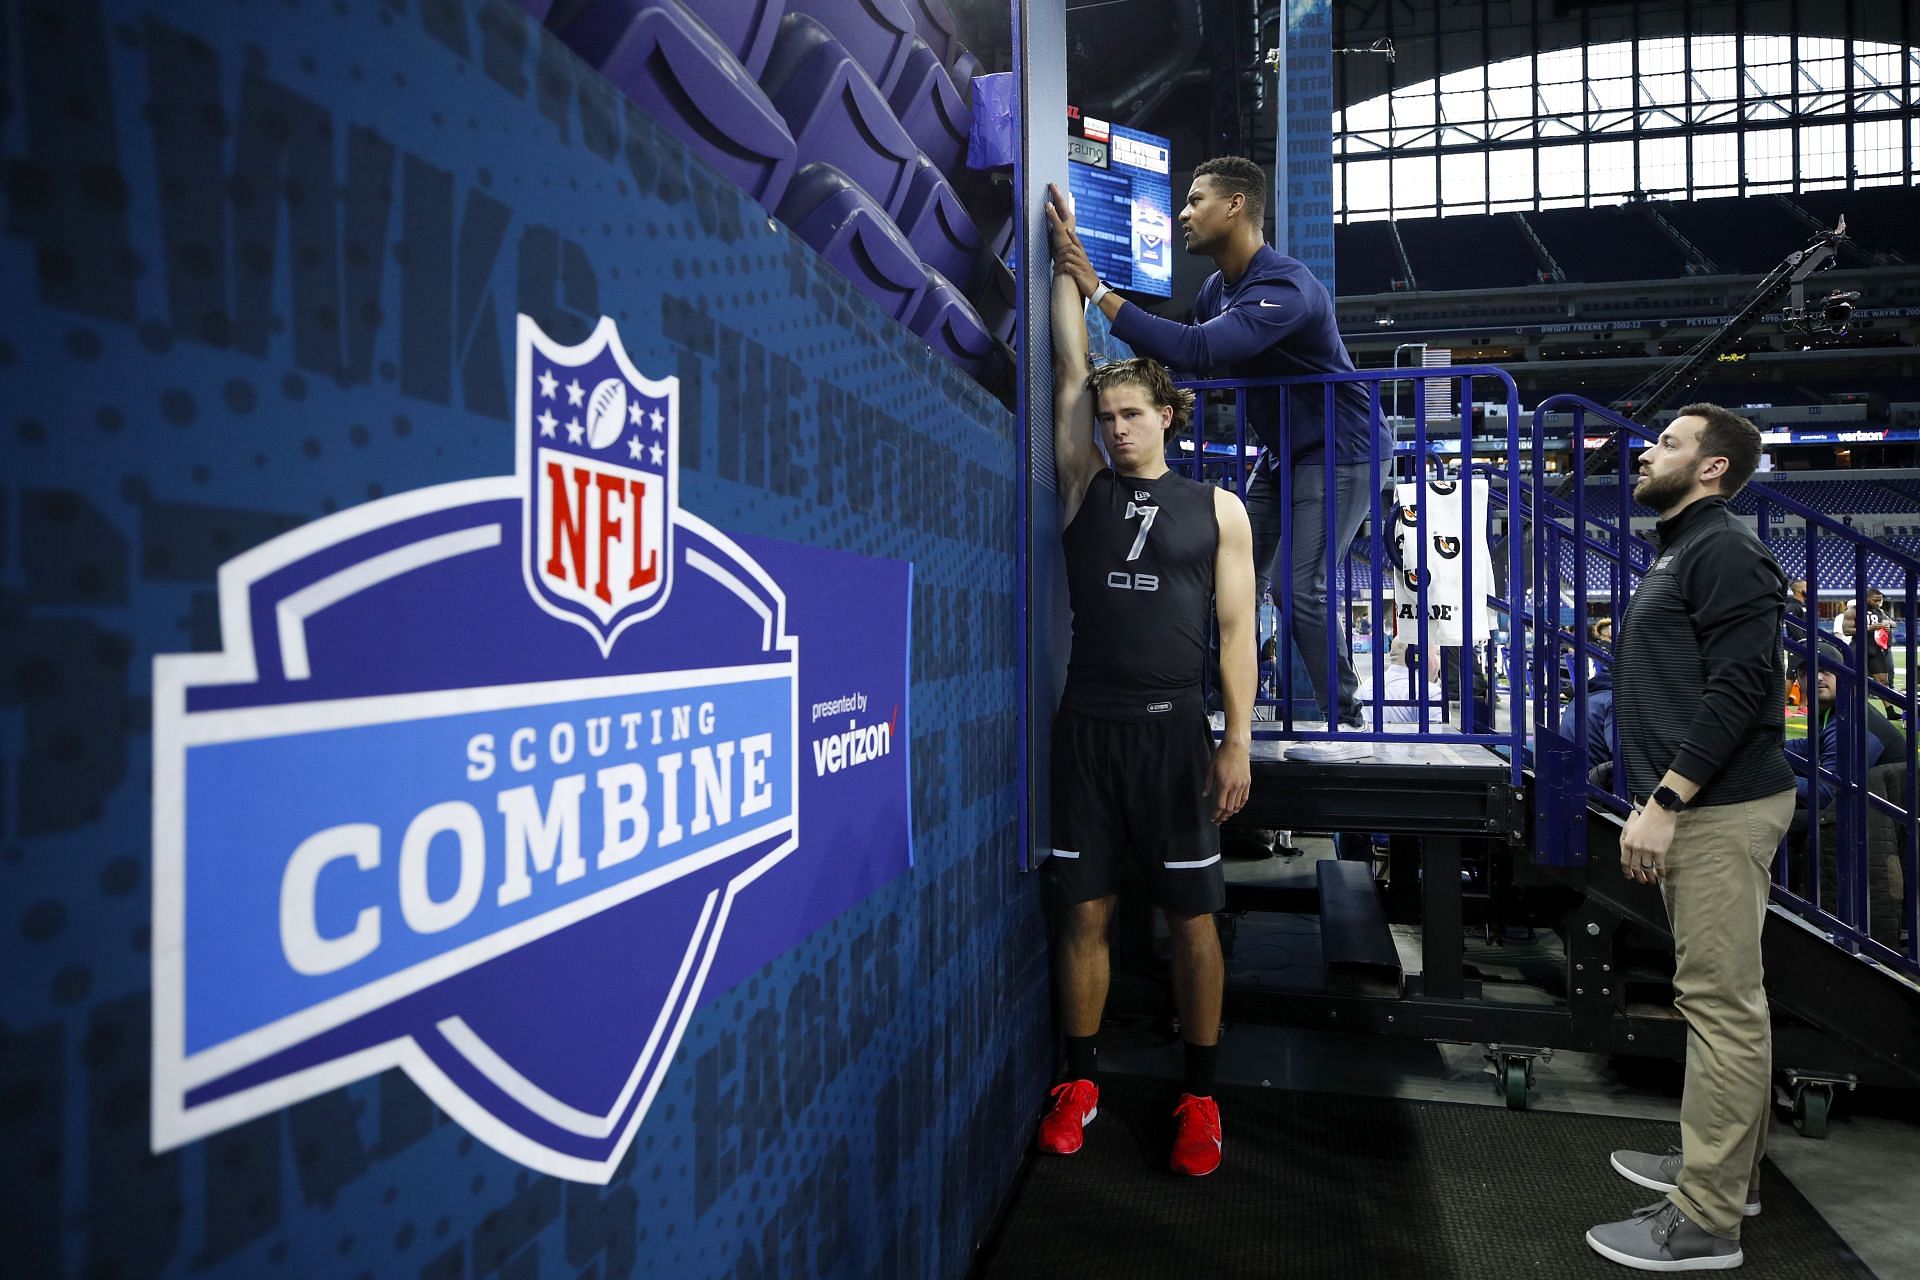 Soon the NFL Combine will take center stage in the 2022 season calendar